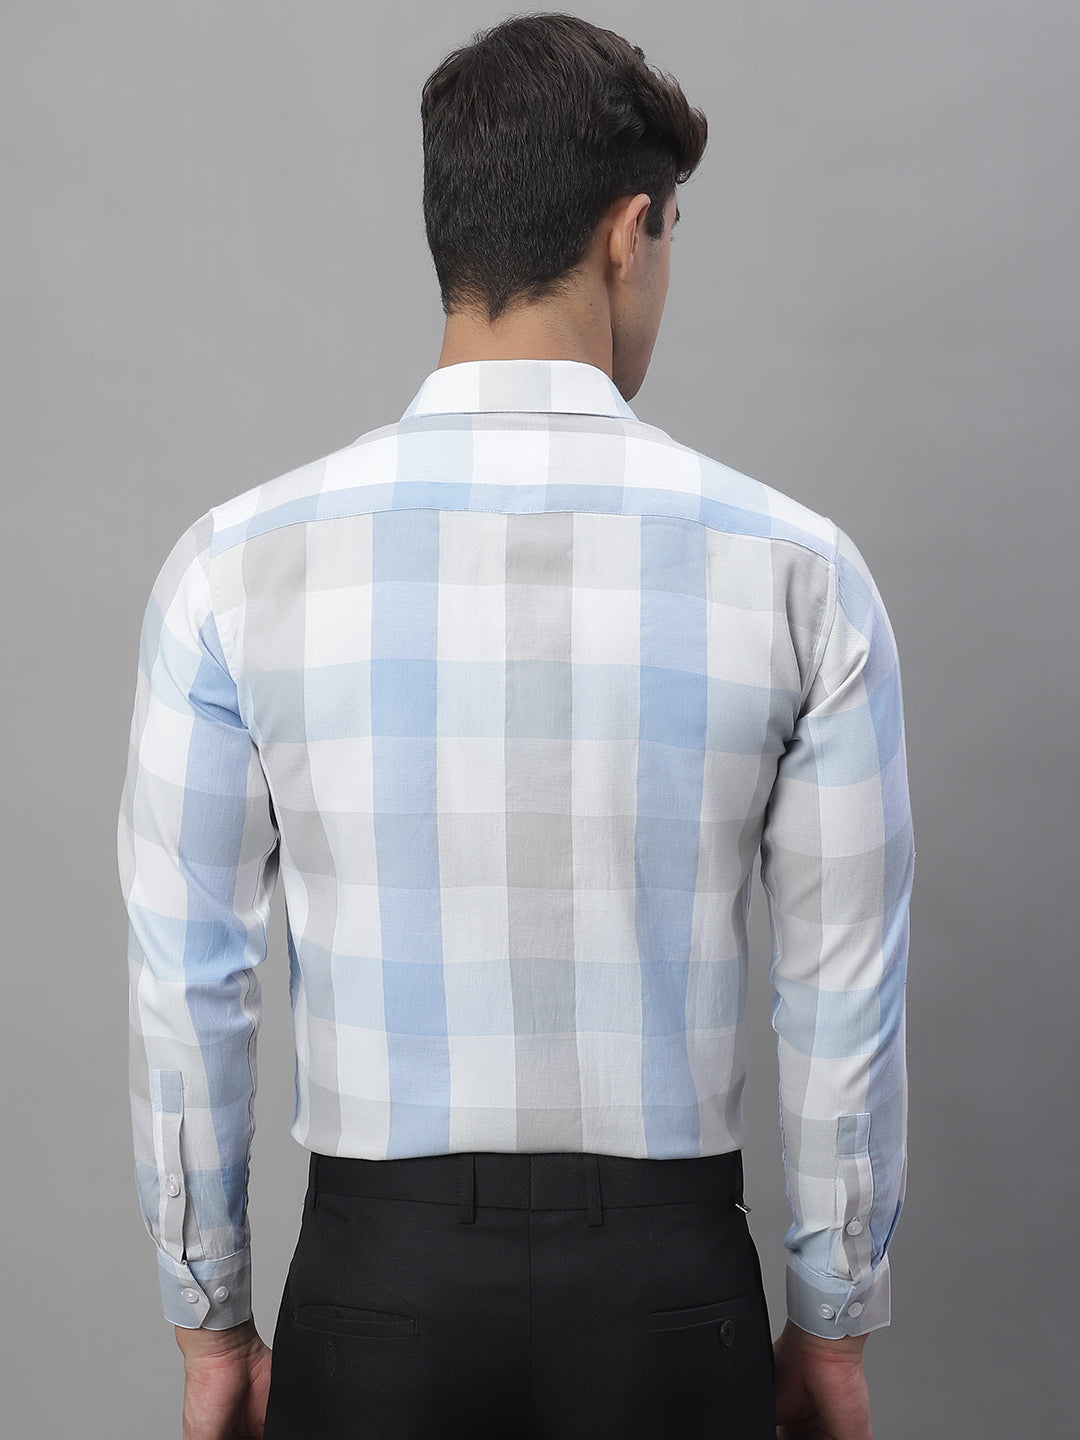 Men's Pure Cotton Checked Formal Shirts